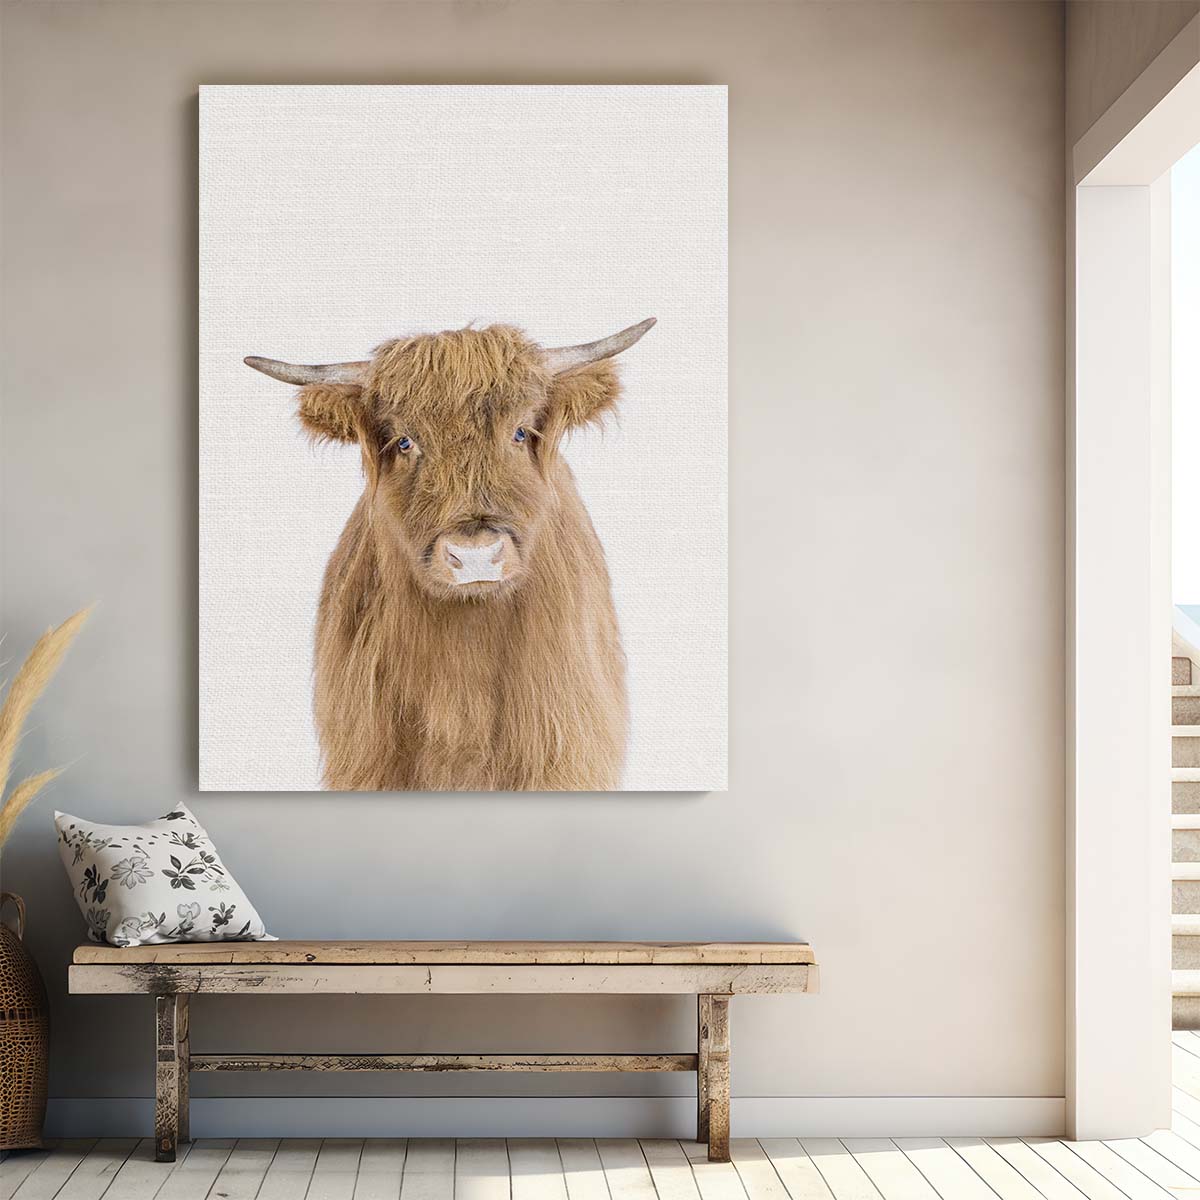 Pastoral Baby Cow Portrait, Rural Farmhouse Wall Art by Luxuriance Designs, made in USA